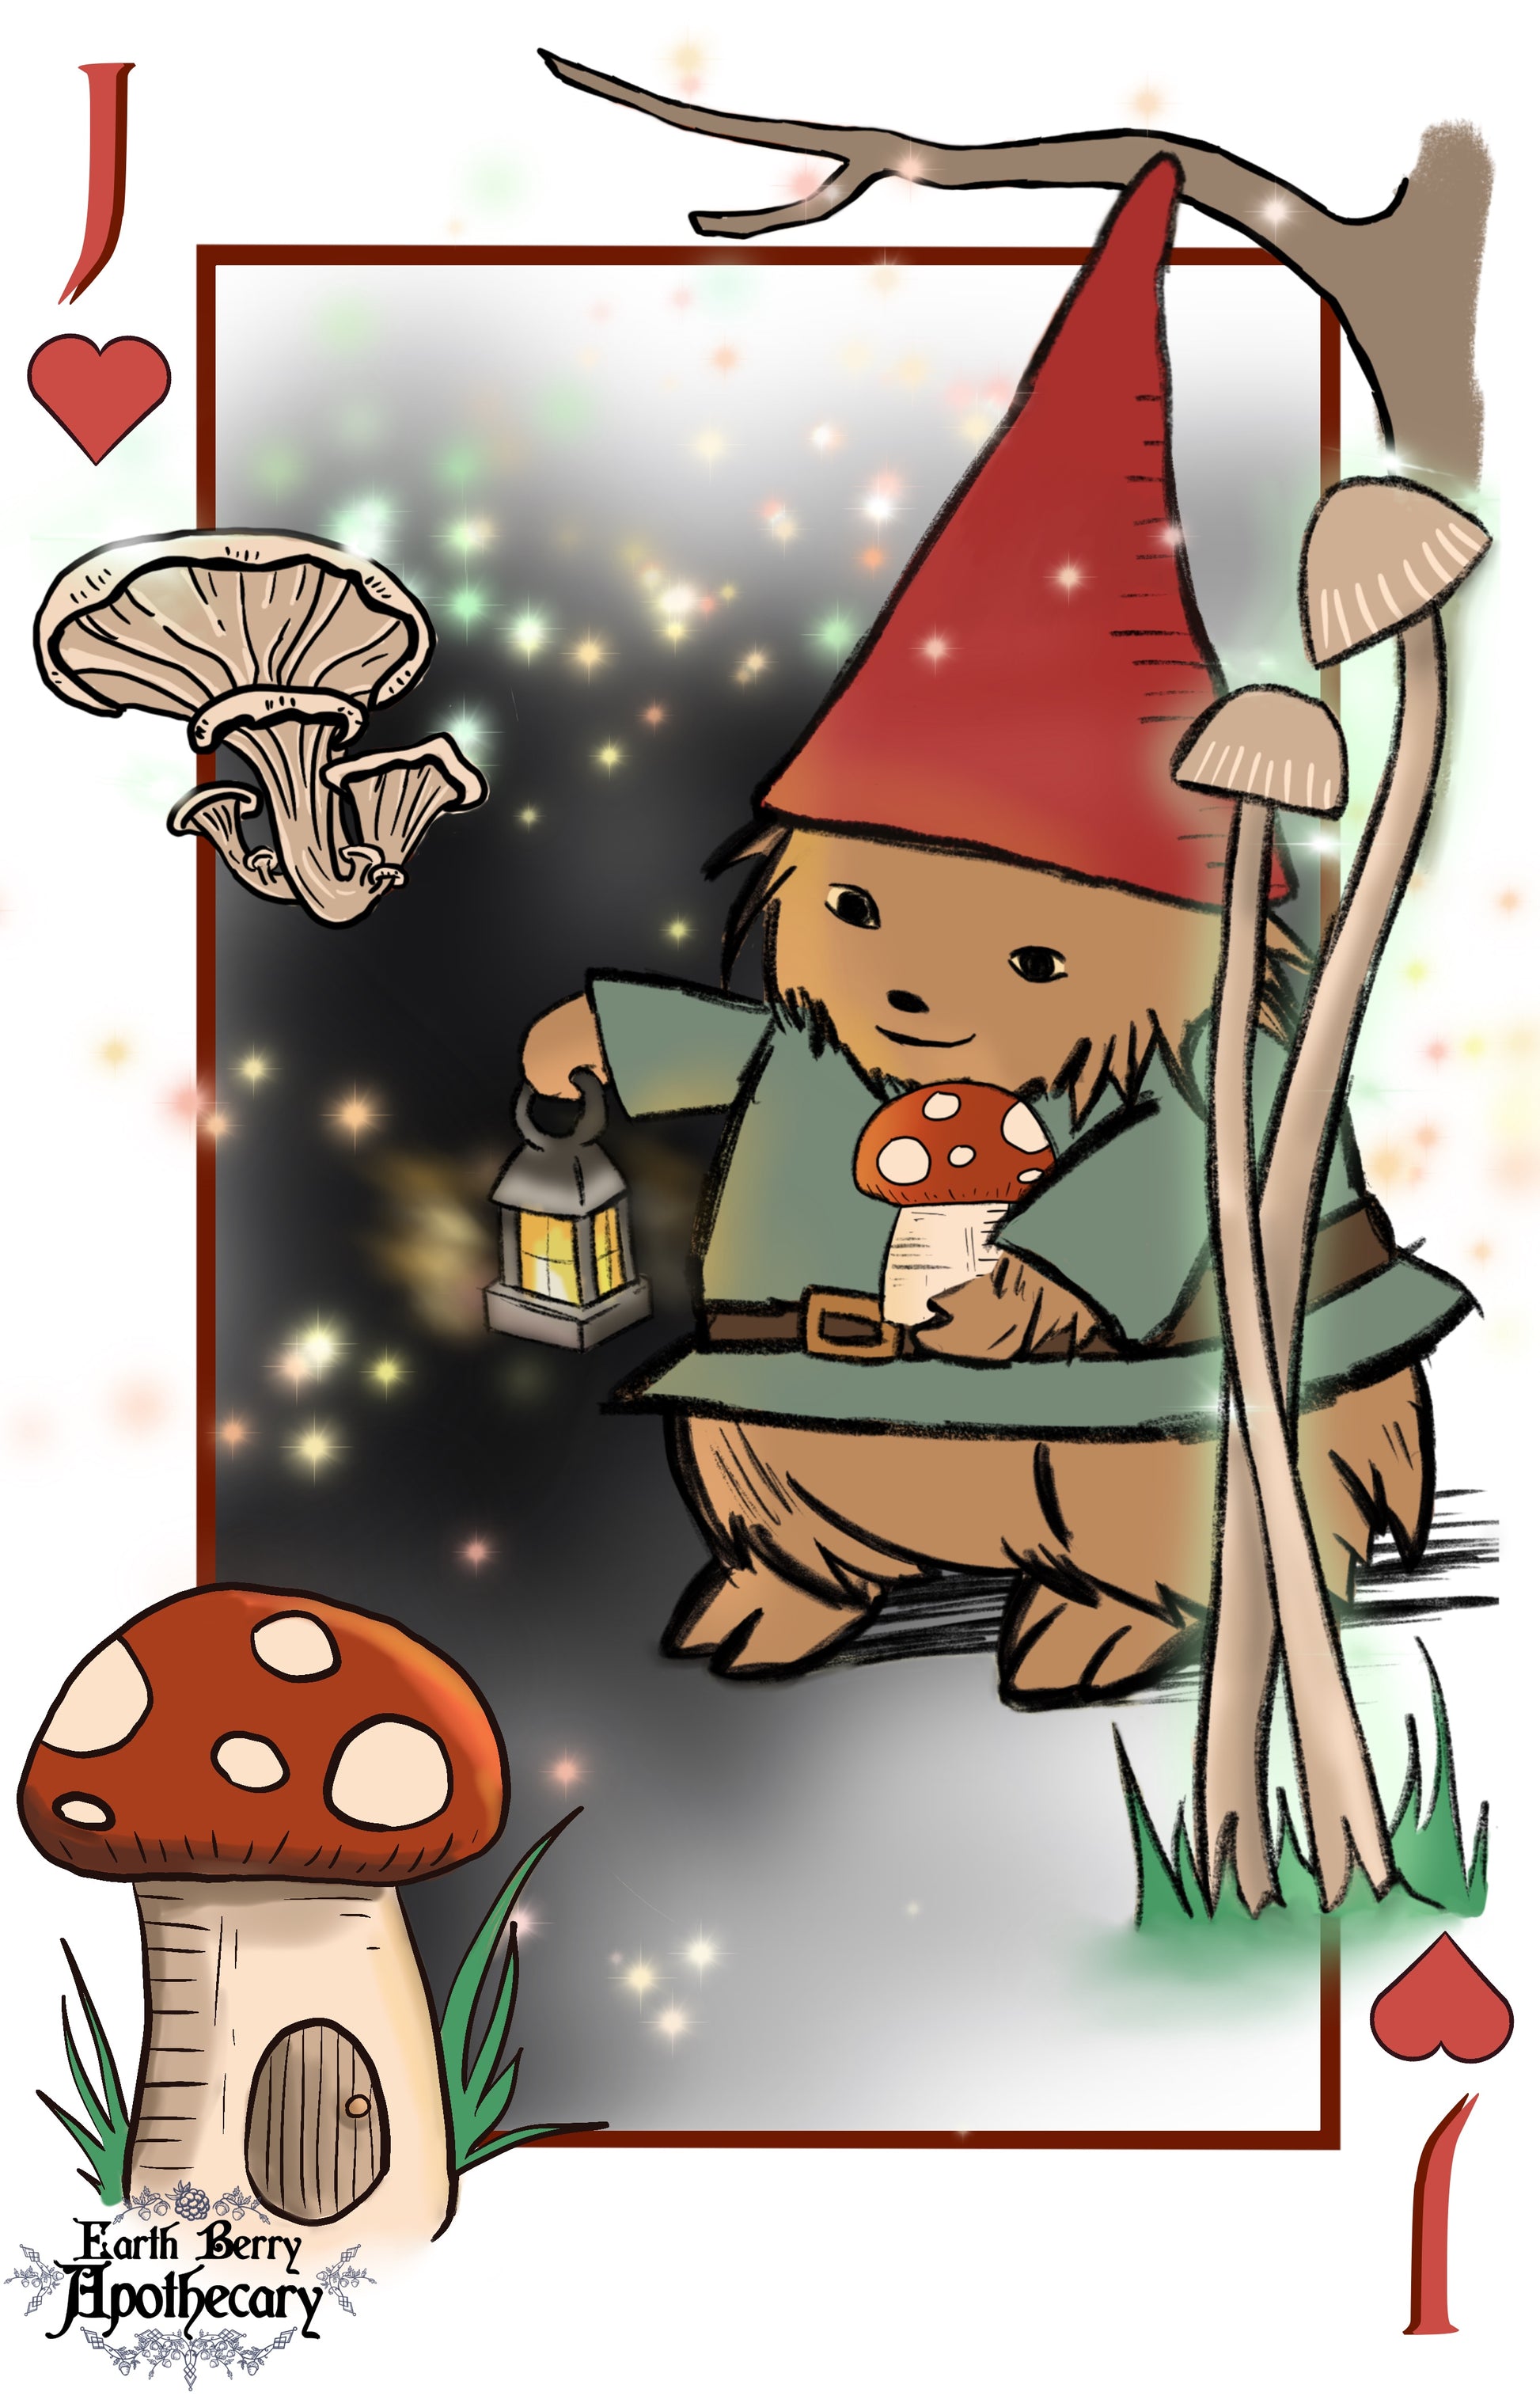 Fantasy themed playing cards. The jack of hearts playing cards depicts a hedge witch gnome holding a glowing lantern and fairy mushroom. A mushroom house sits in the foreground. Oyster mushrooms grow on a tree in the dark.